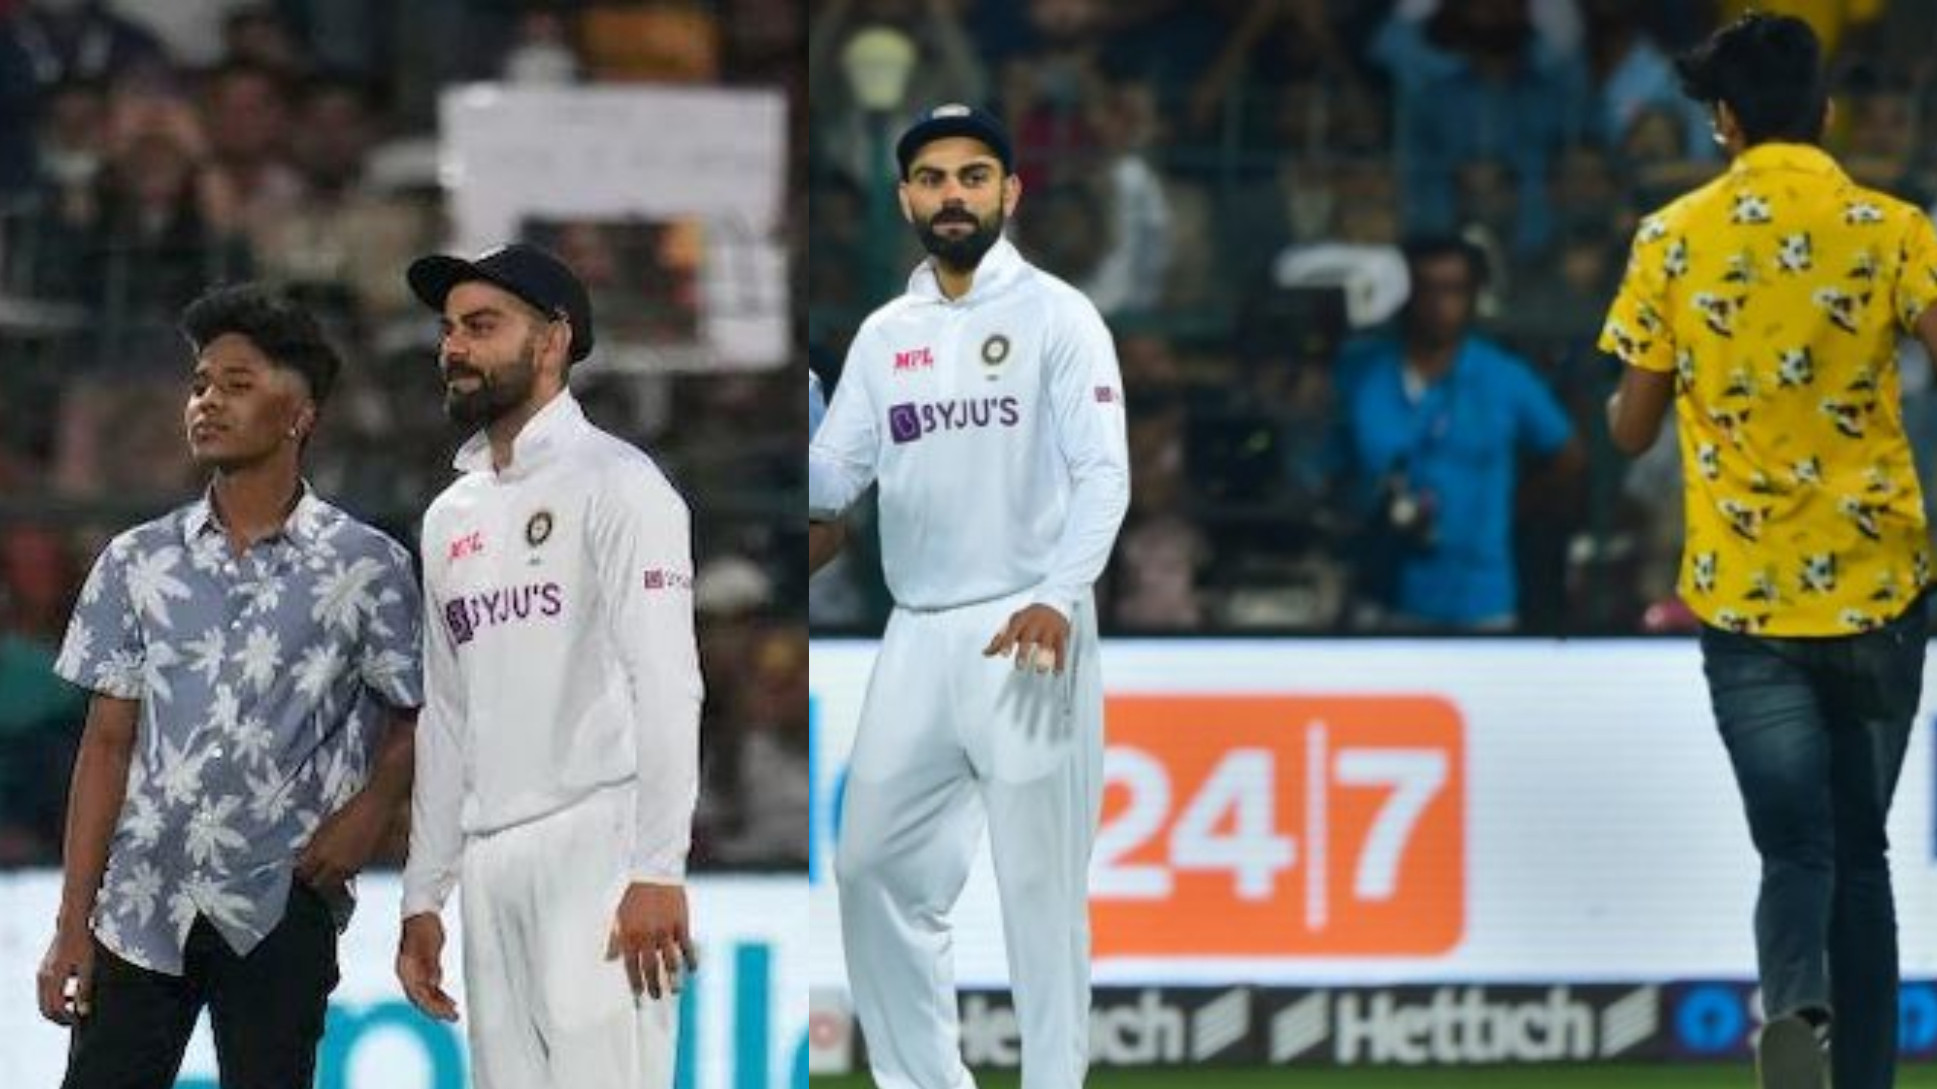 IND v SL 2022: Four spectators who breached security in Bengaluru to meet Virat Kohli arrested by police